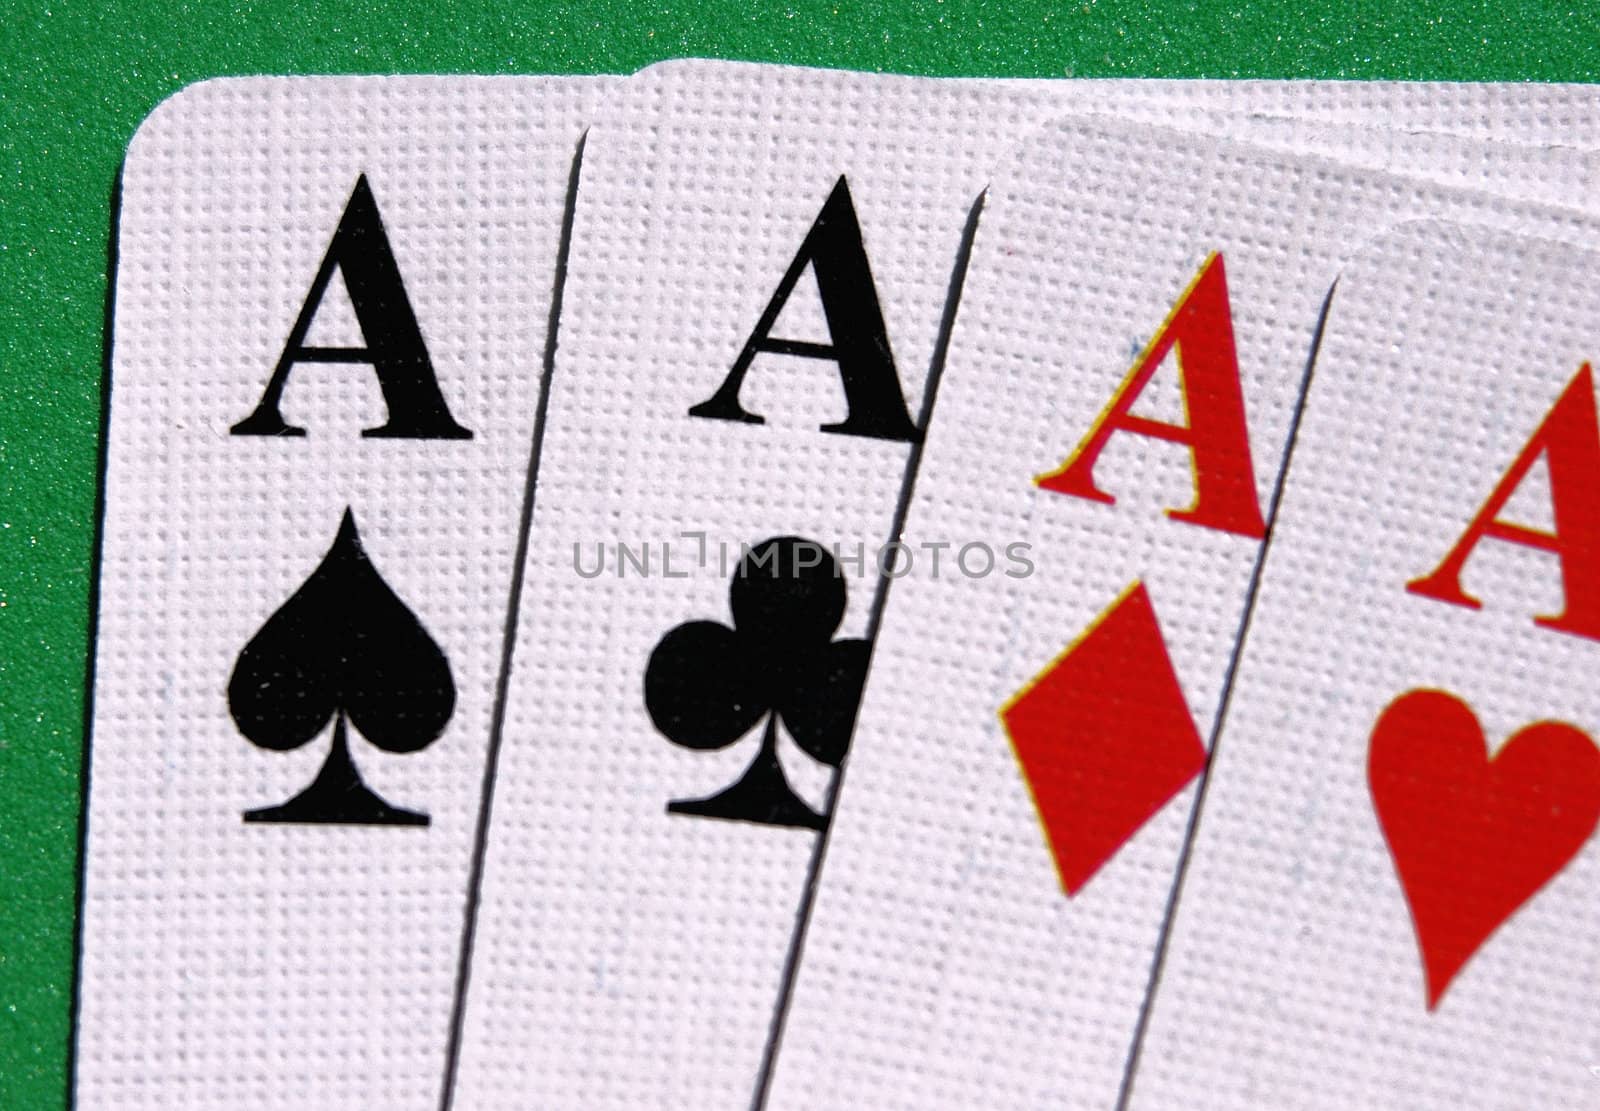 four aces seen up close in a green table